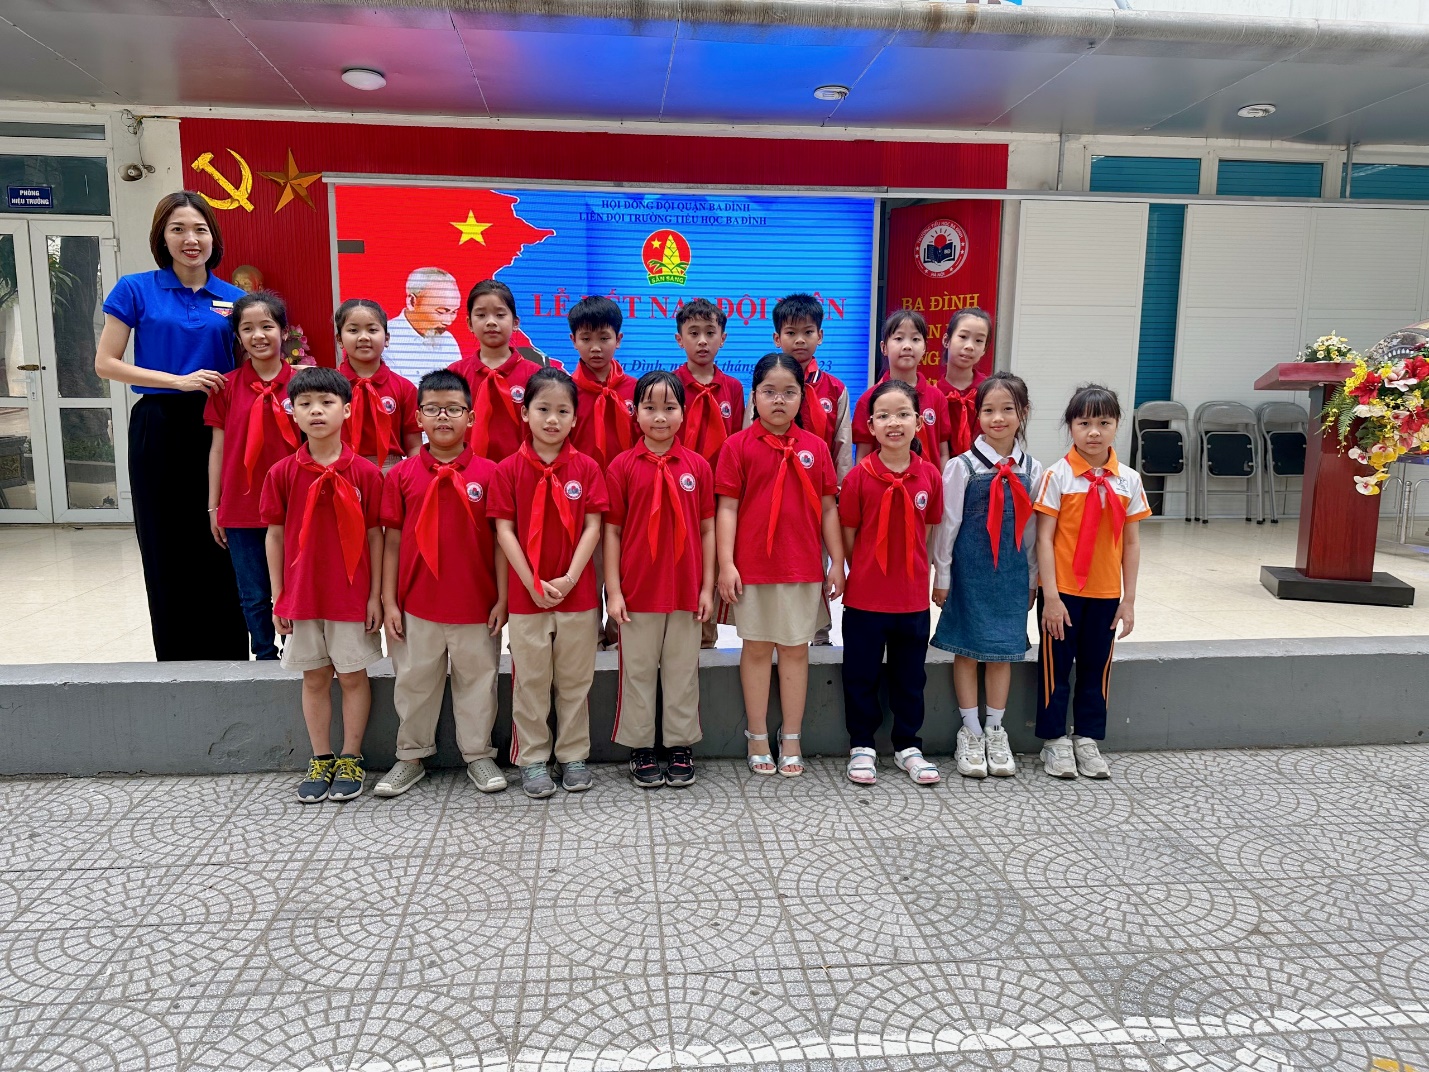 A group of children in red shirts

Description automatically generated